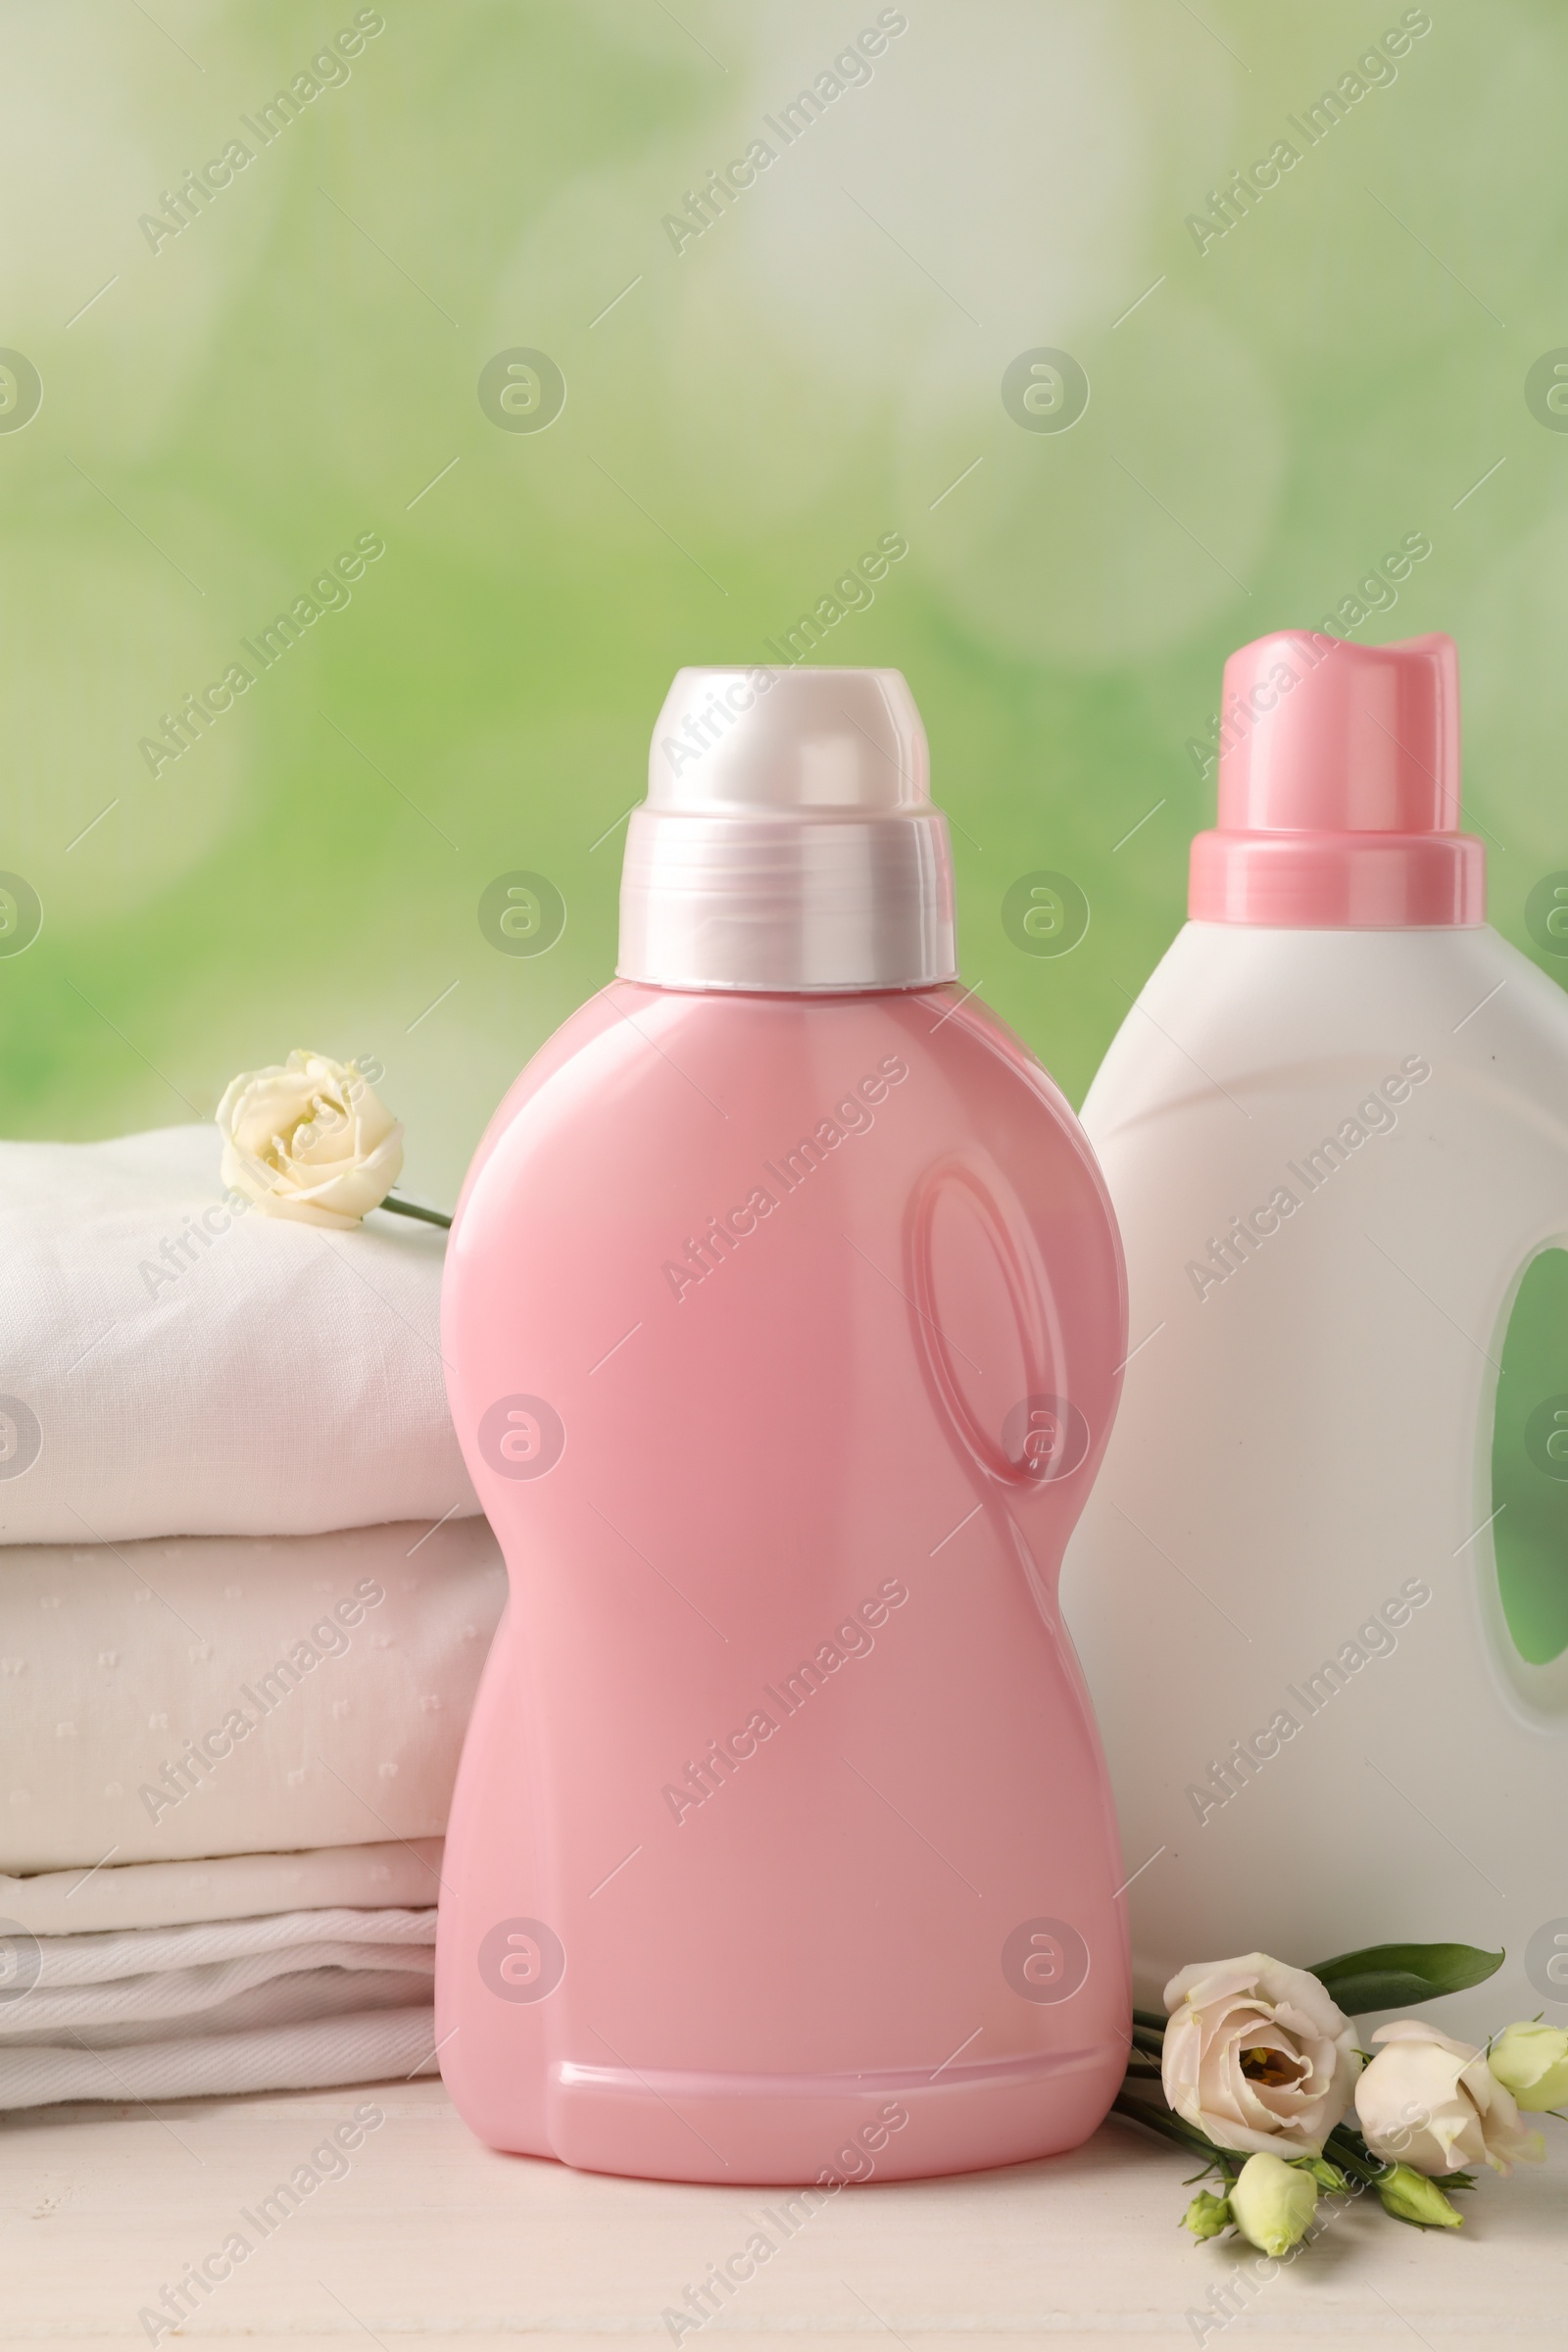 Photo of Bottles of laundry detergents, clean clothes and roses on white wooden table